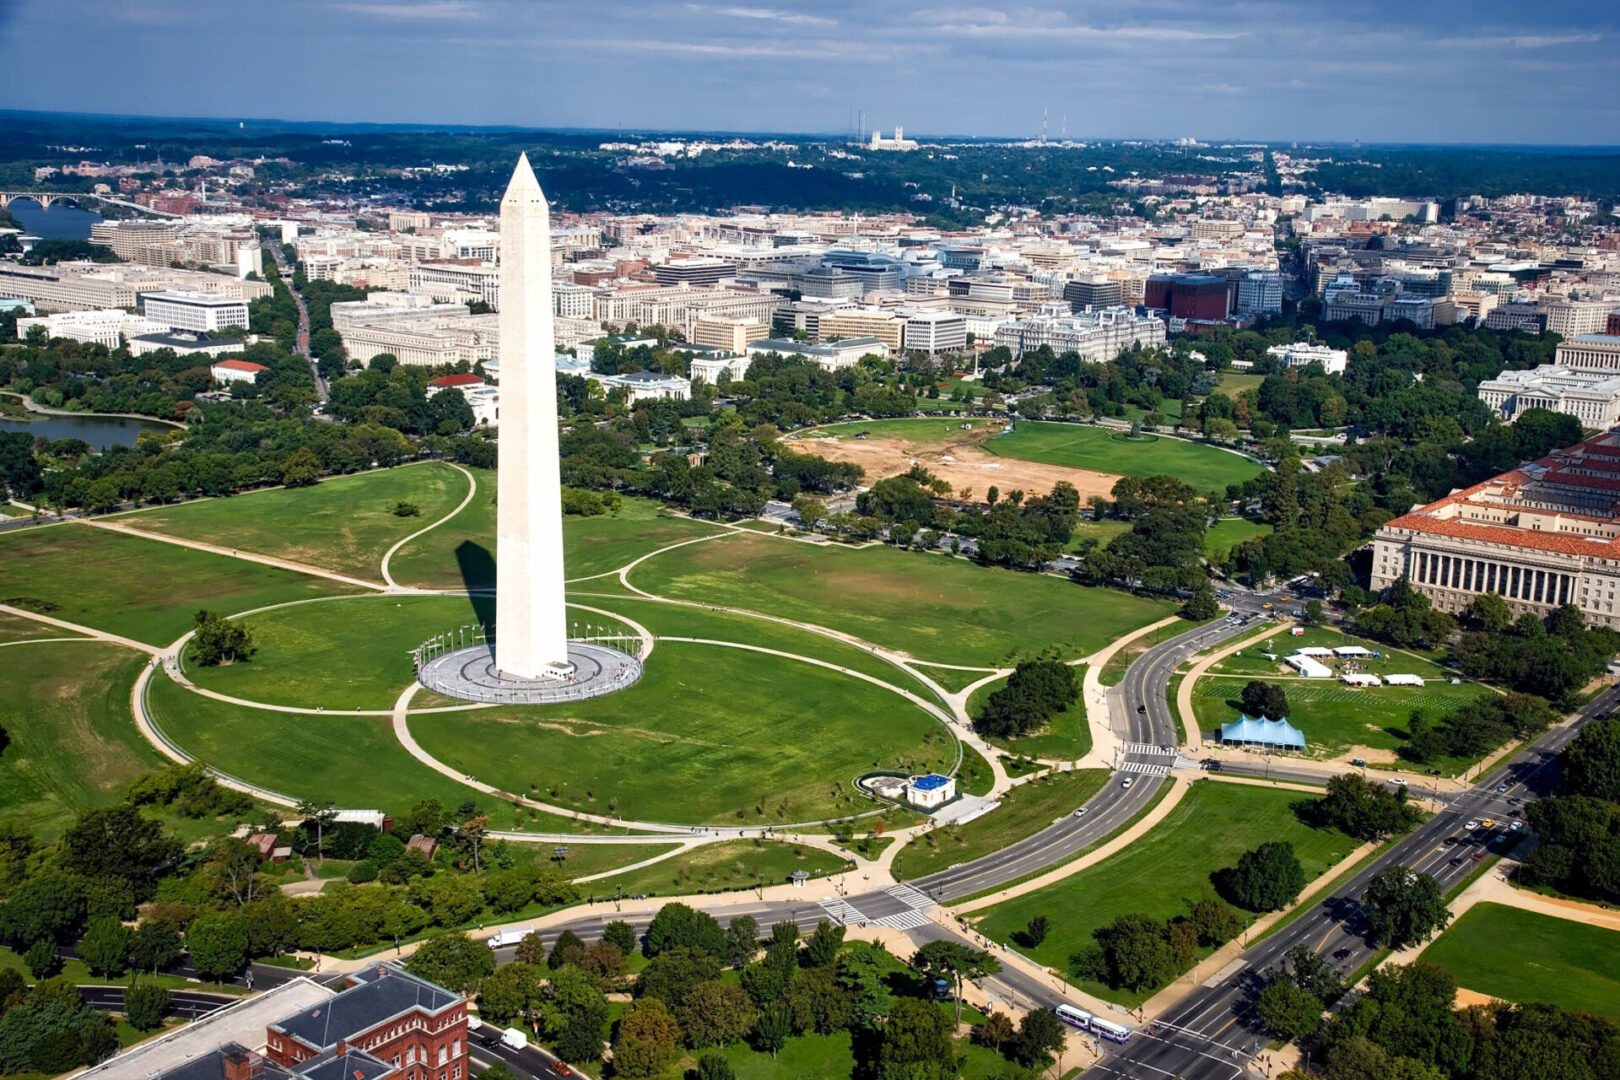 A view of the washington monument from above.